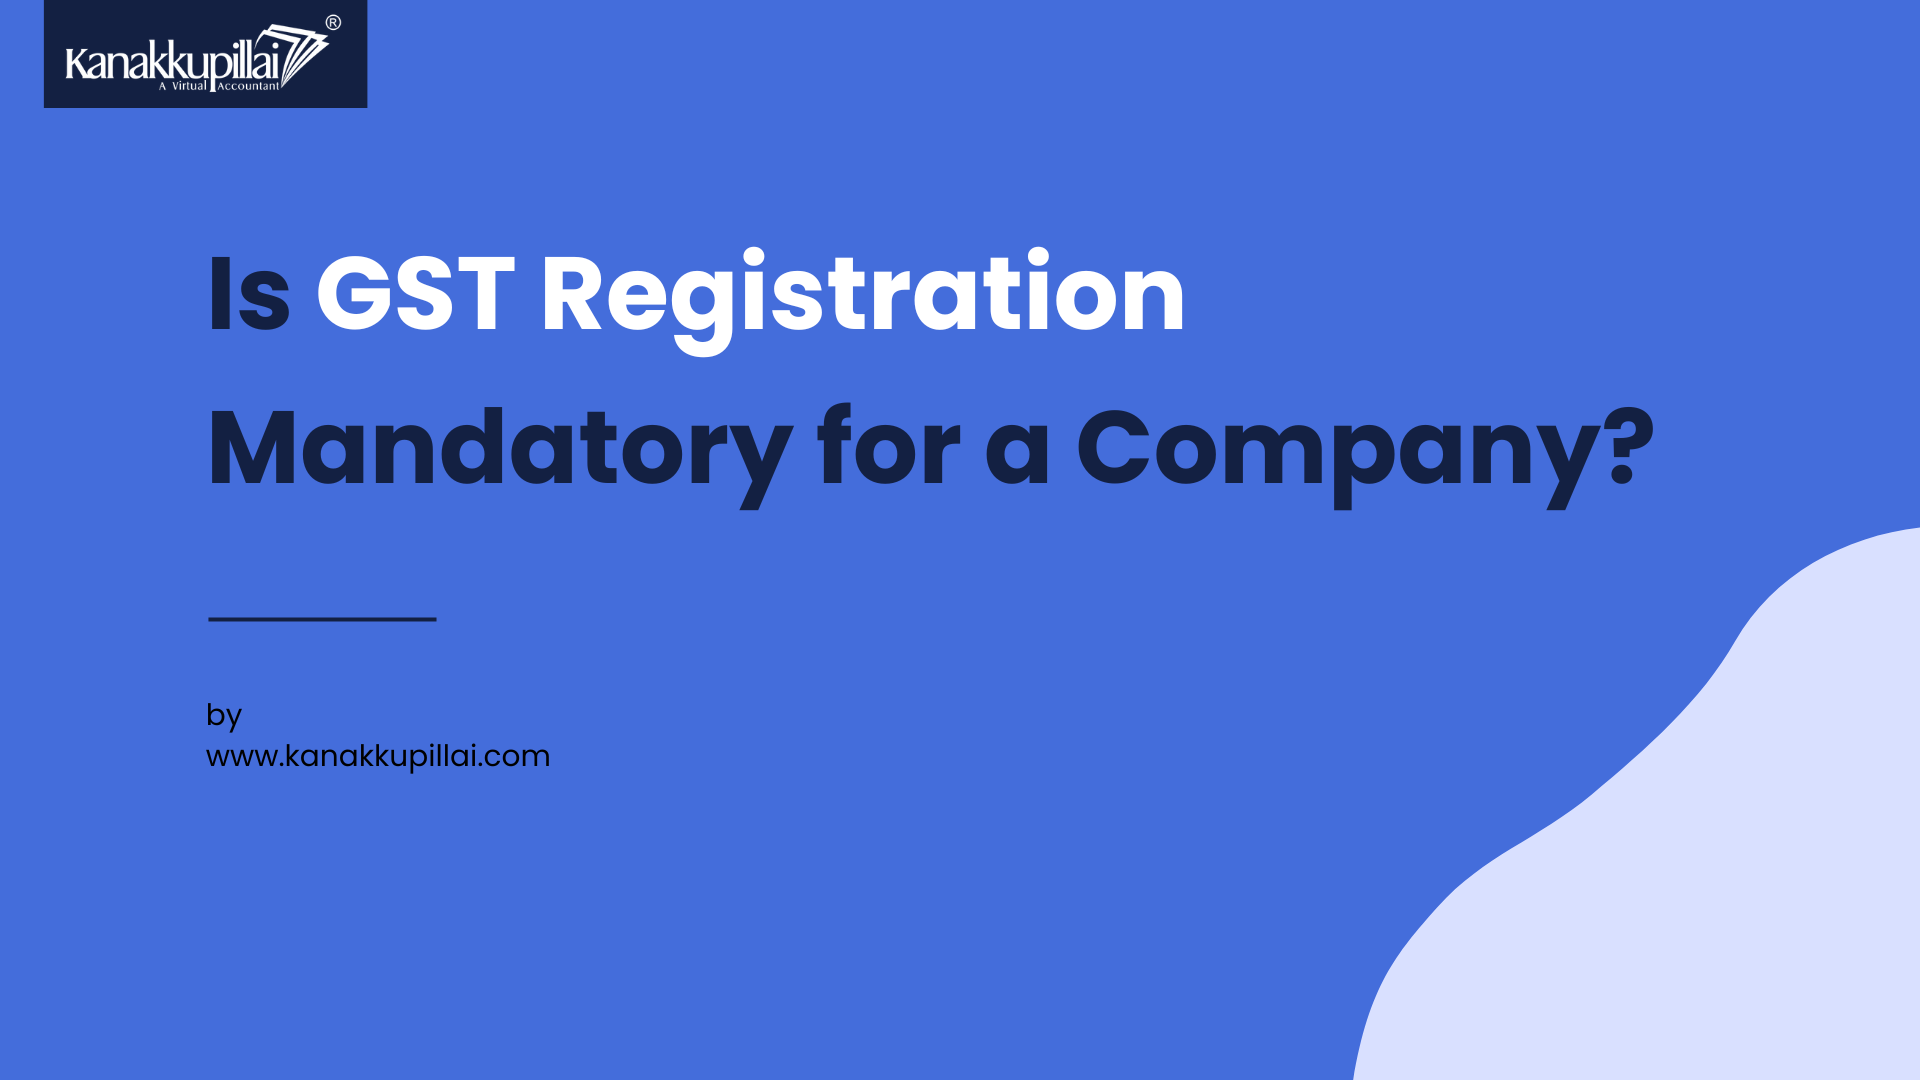 Is GST Registration Mandatory for a Company?